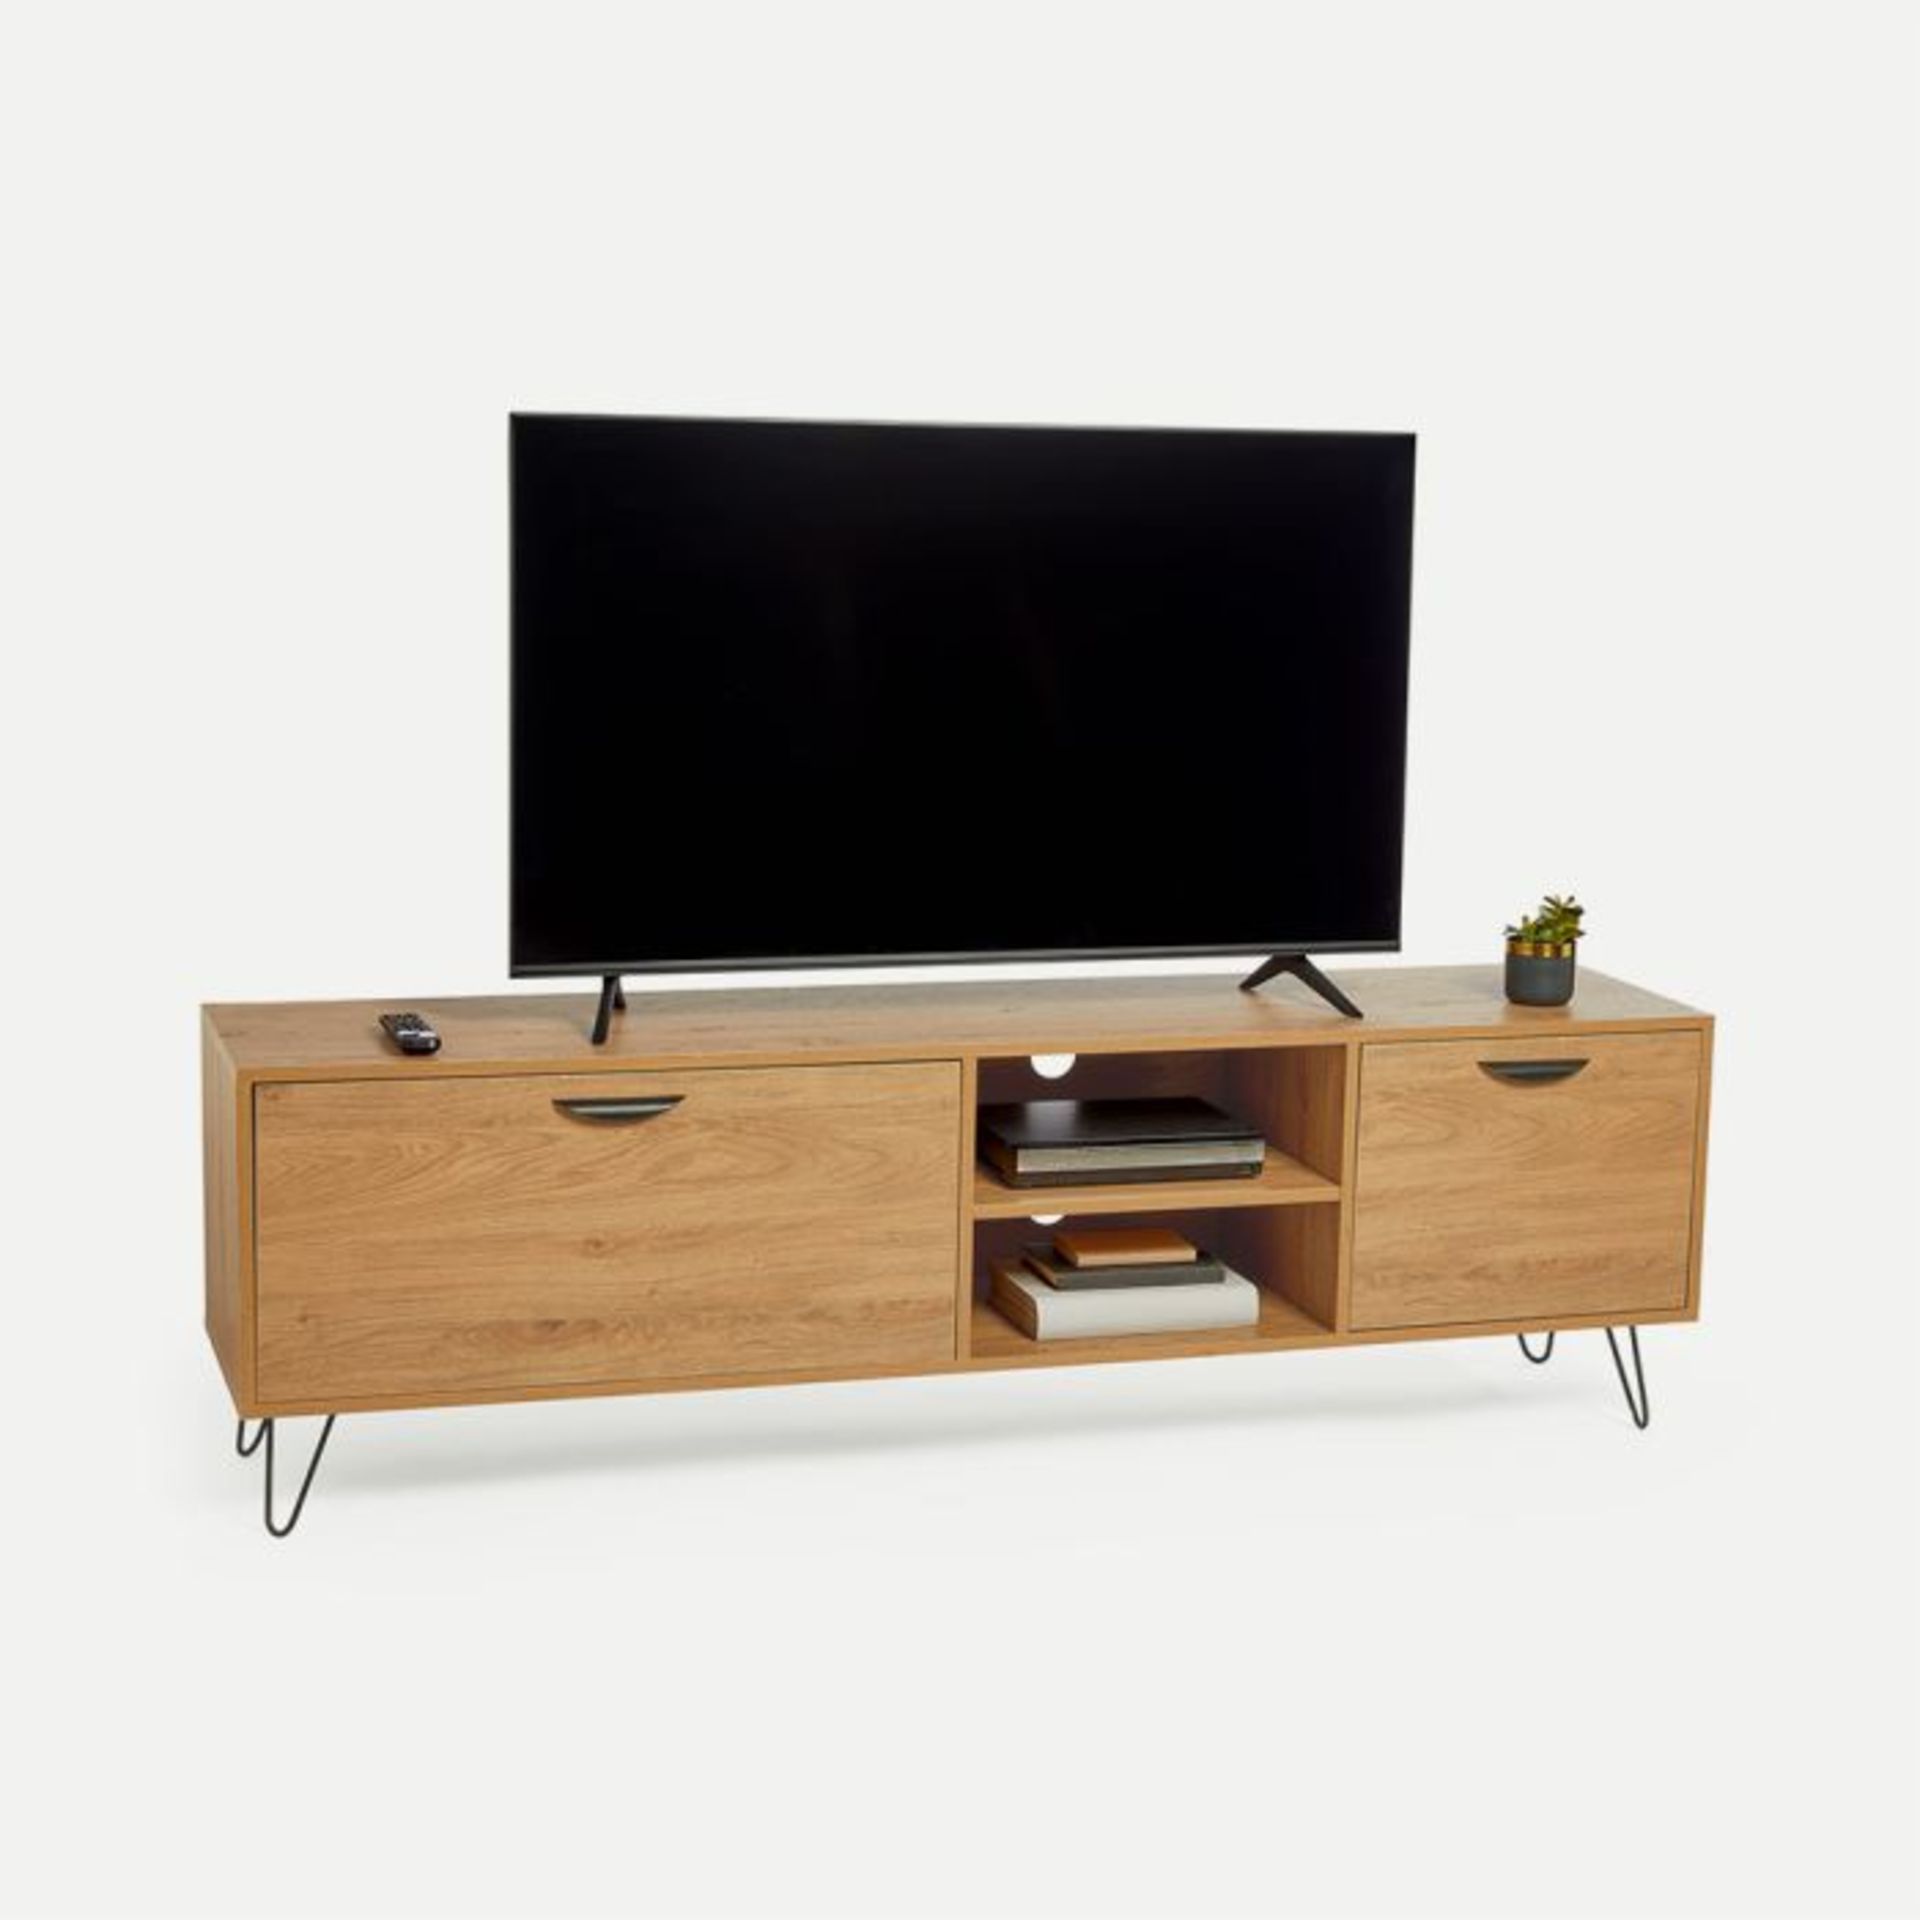 Capri Oak Effect Large TV Unit. - ER51. RRP £199.99. The irregular front is one of the most charming